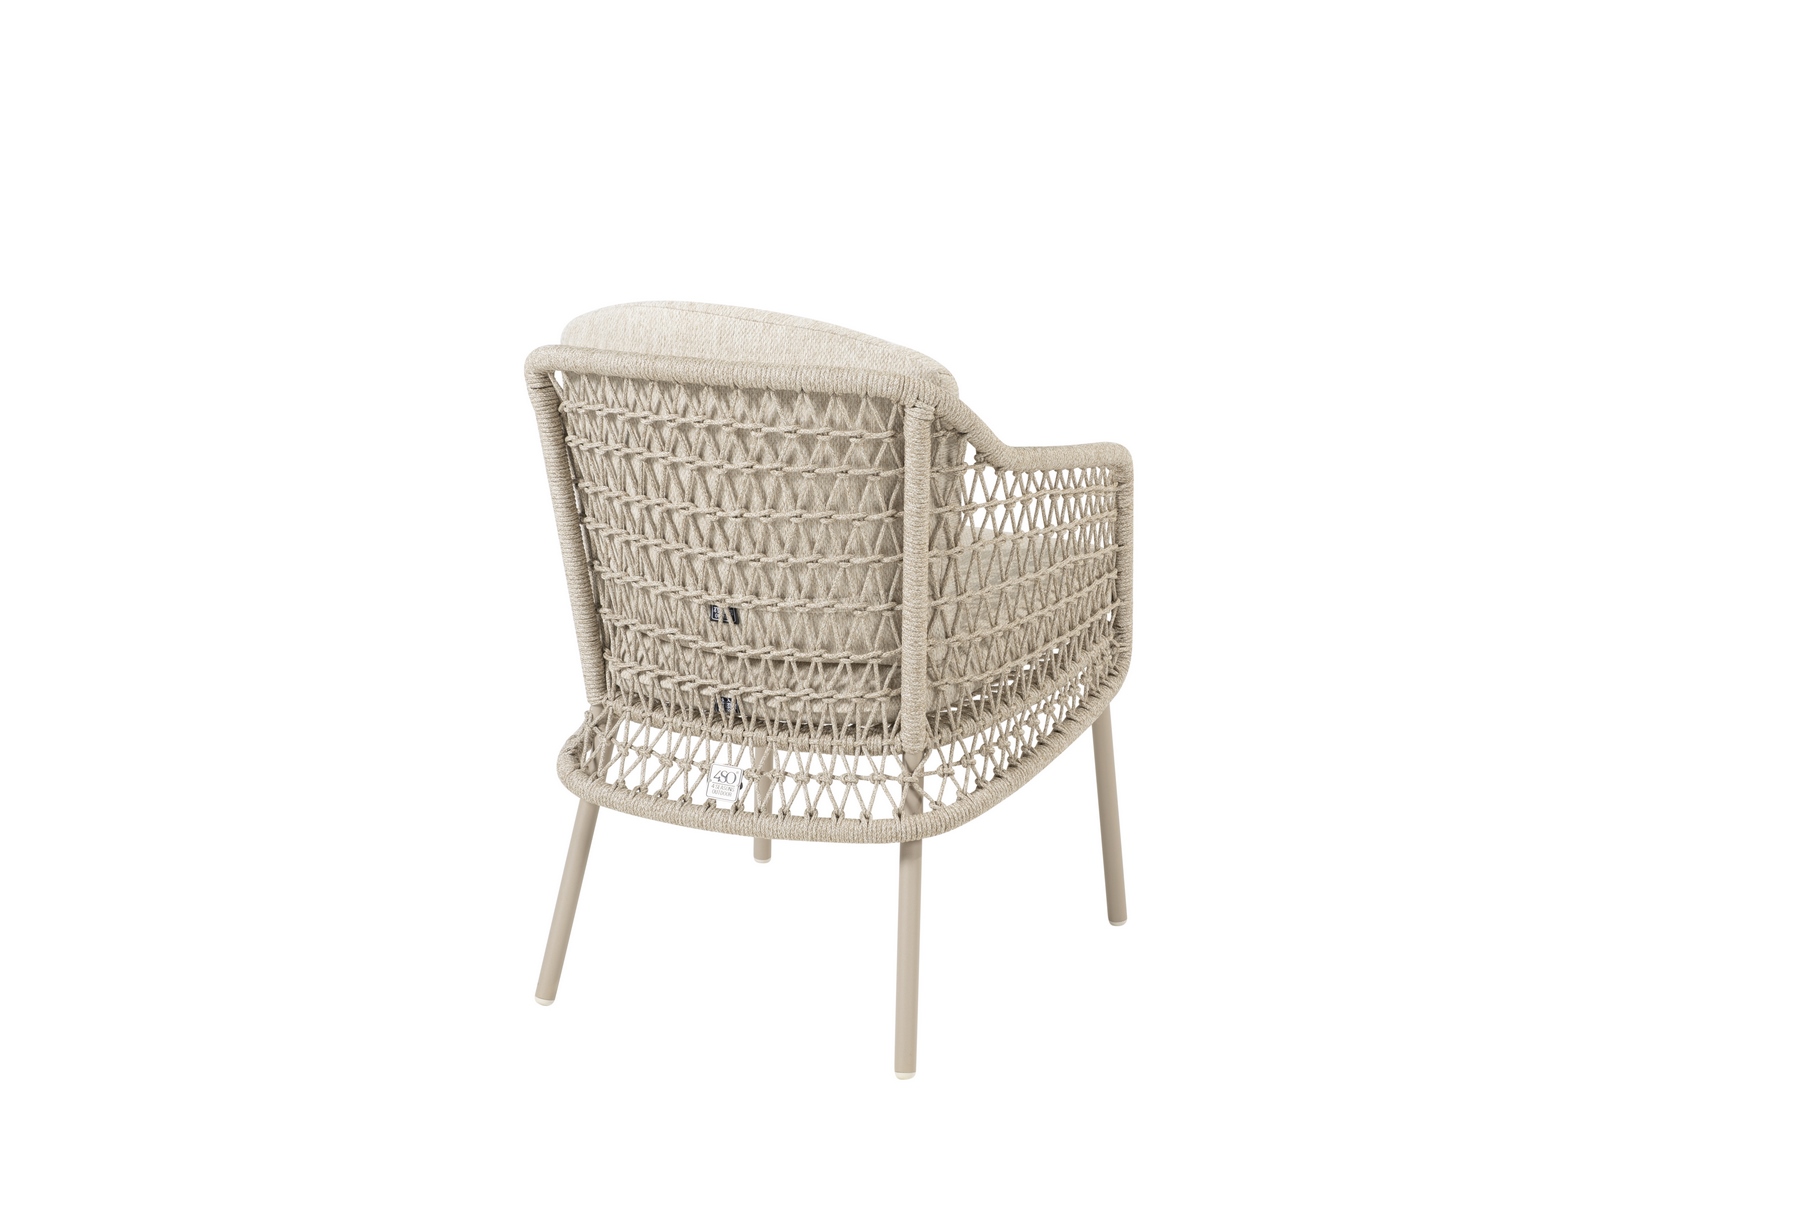 213935__Puccini_dining_chair_latte_with_2_cushions_03.jpg